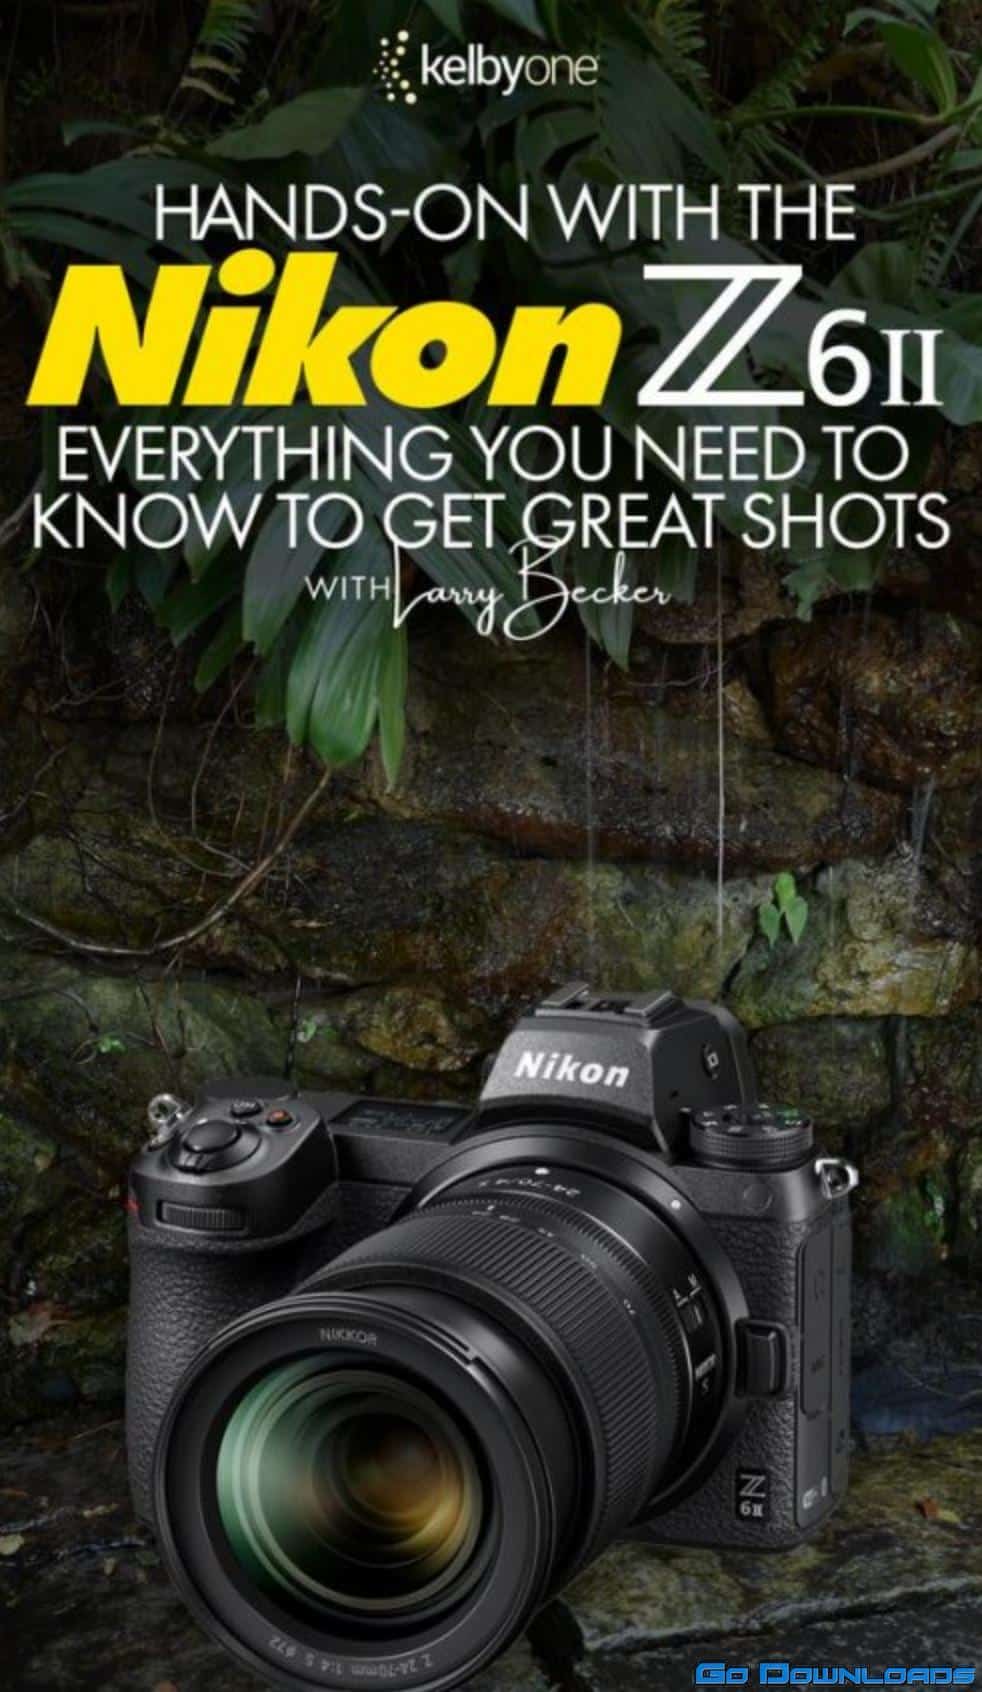 KelbyOne – Hands-On with the Nikon Z6 II: Everything you Need to Know to Get Great Shots